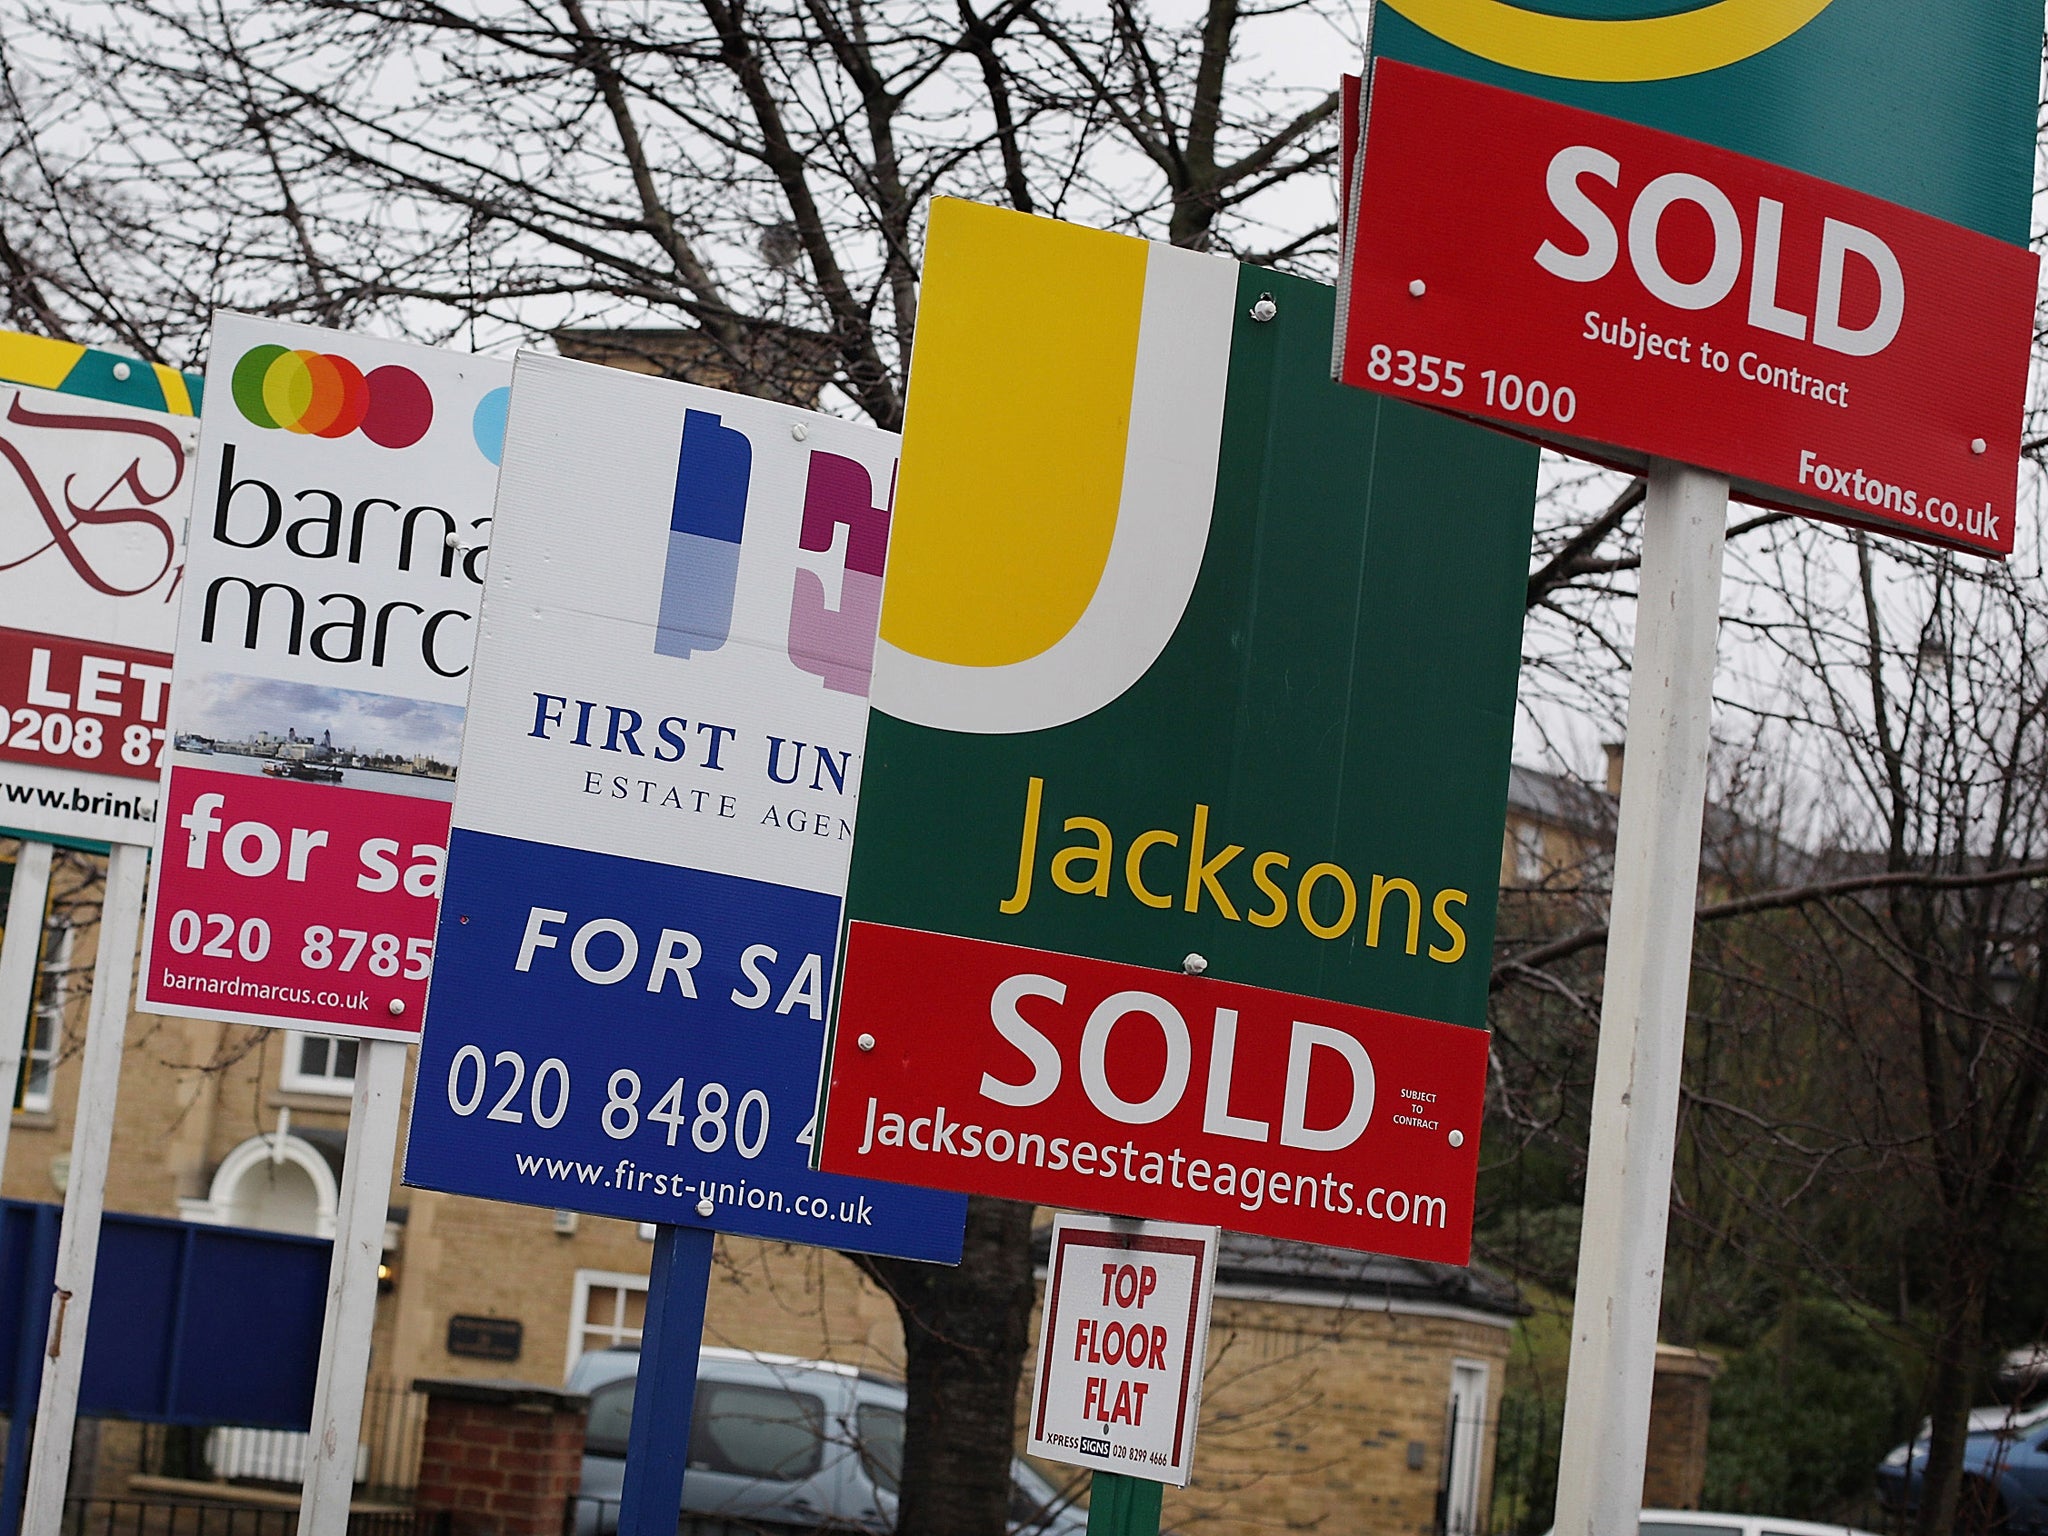 Nationwide says house prices surged by 5.8 per cent year-on-year in October